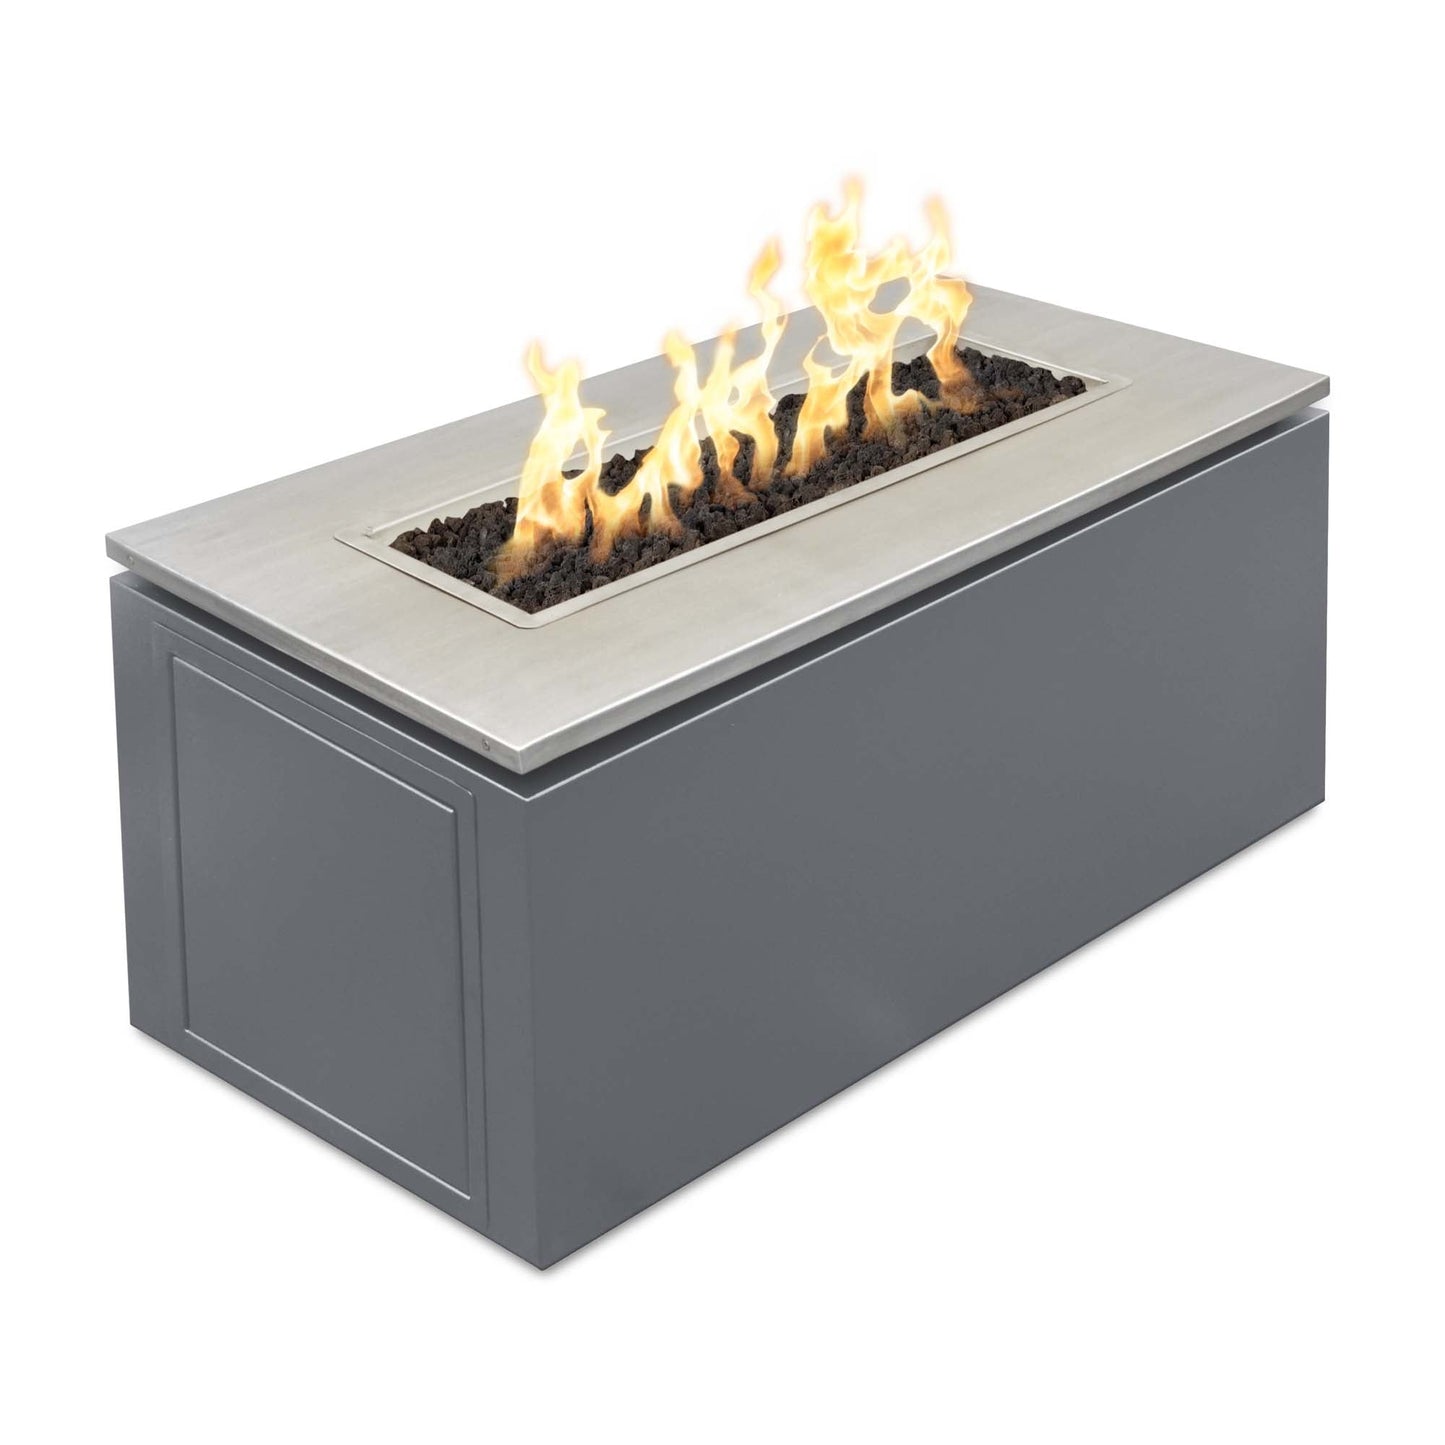 The Outdoor Plus Rectangular Merona 46" Stainless Steel Liquid Propane Fire Pit with 12V Electronic Ignition